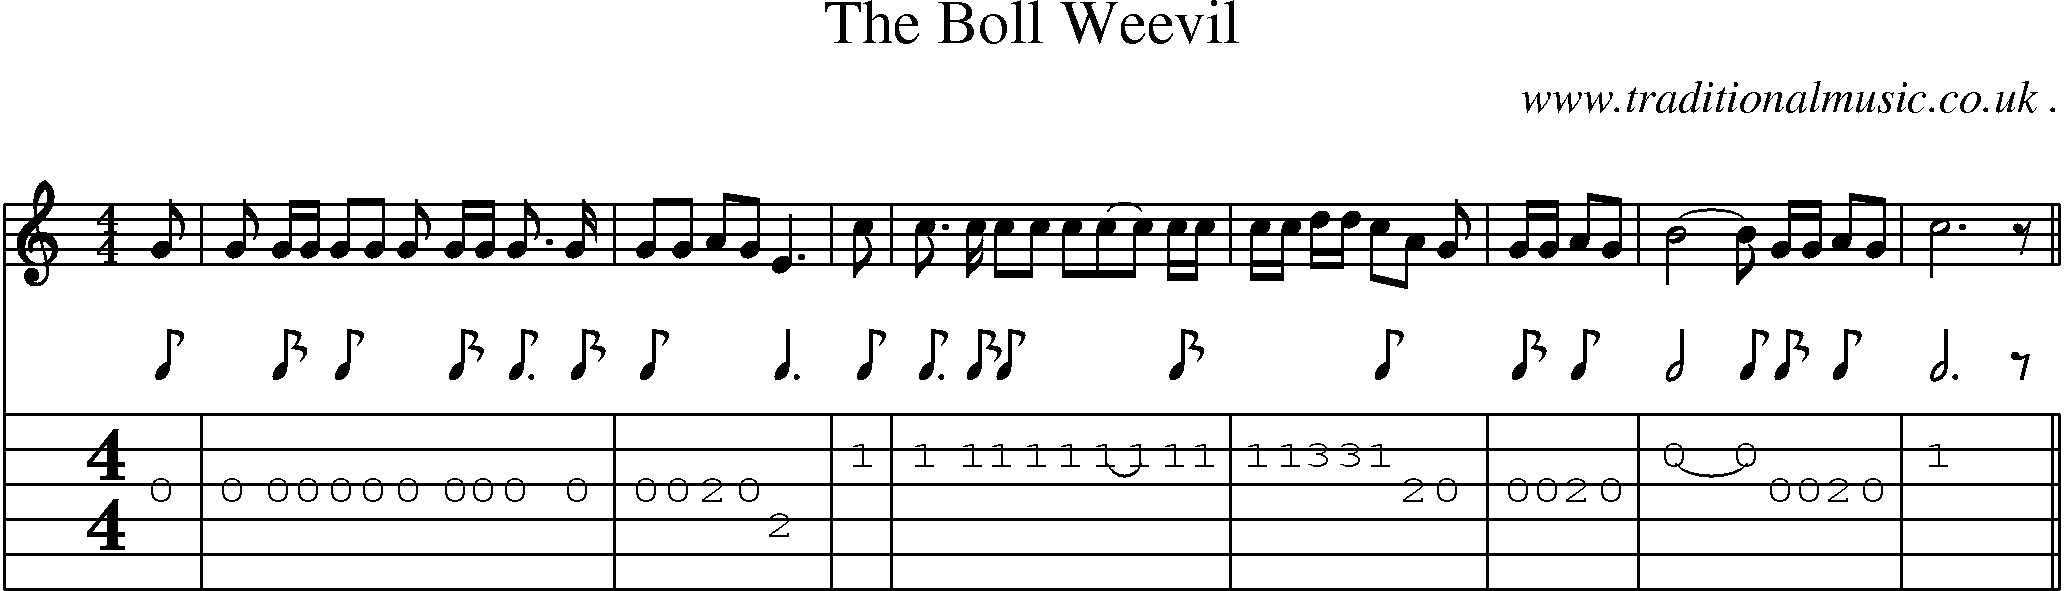 Music Score and Guitar Tabs for The Boll Weevil